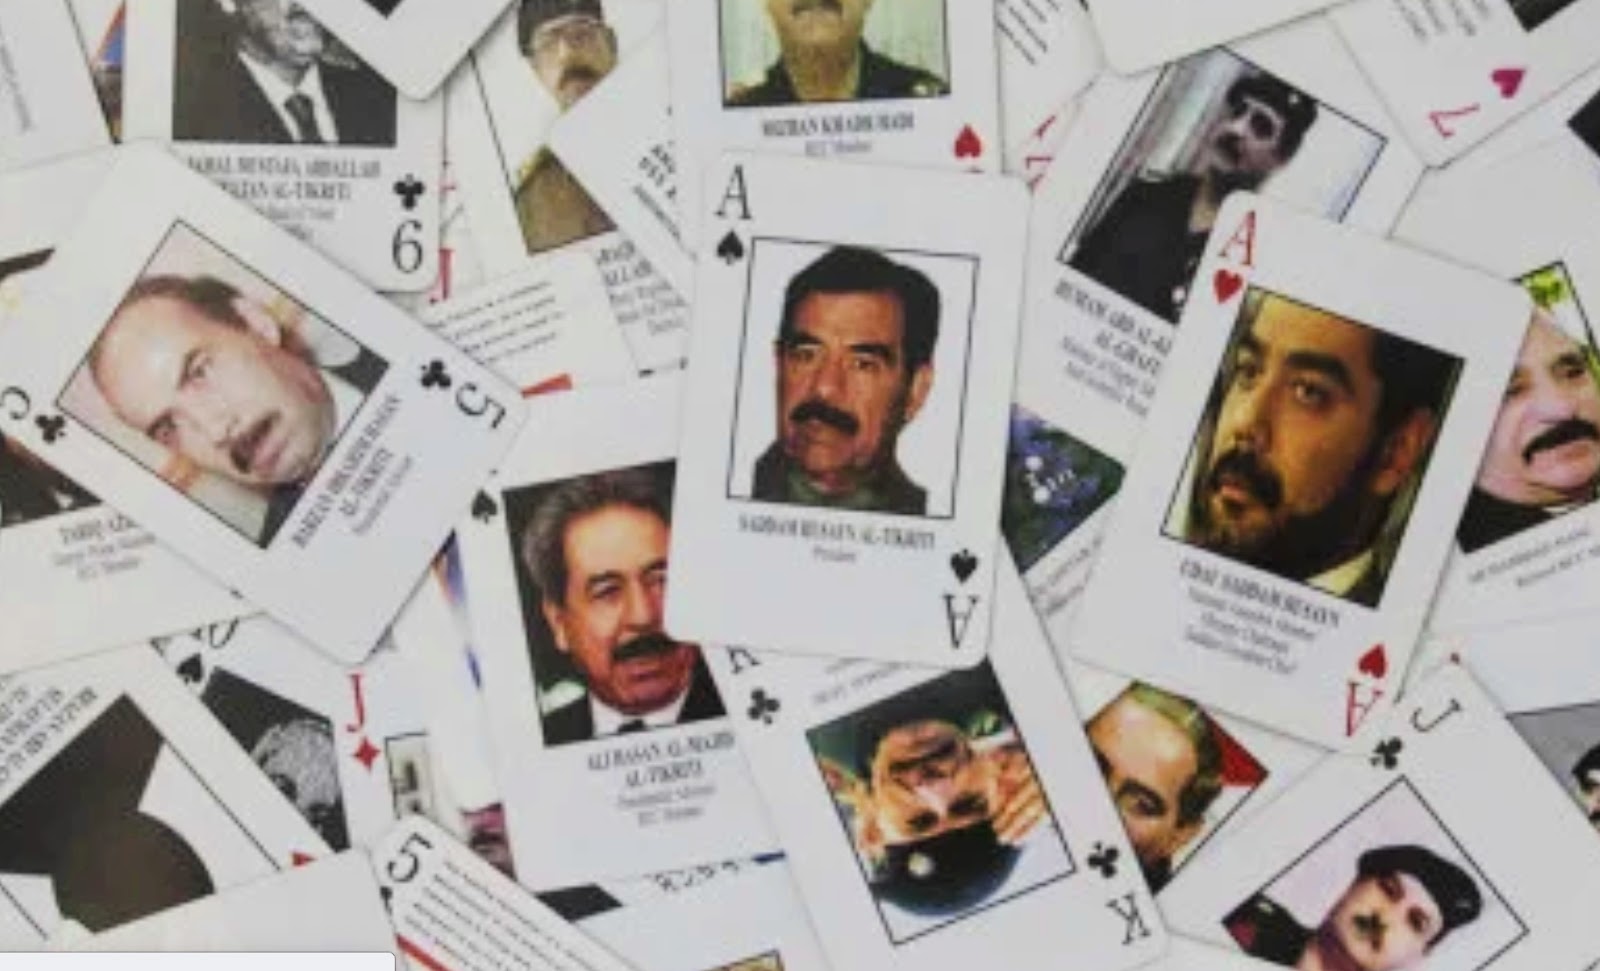 The US Deck of cards with targets including Saddam Hussein